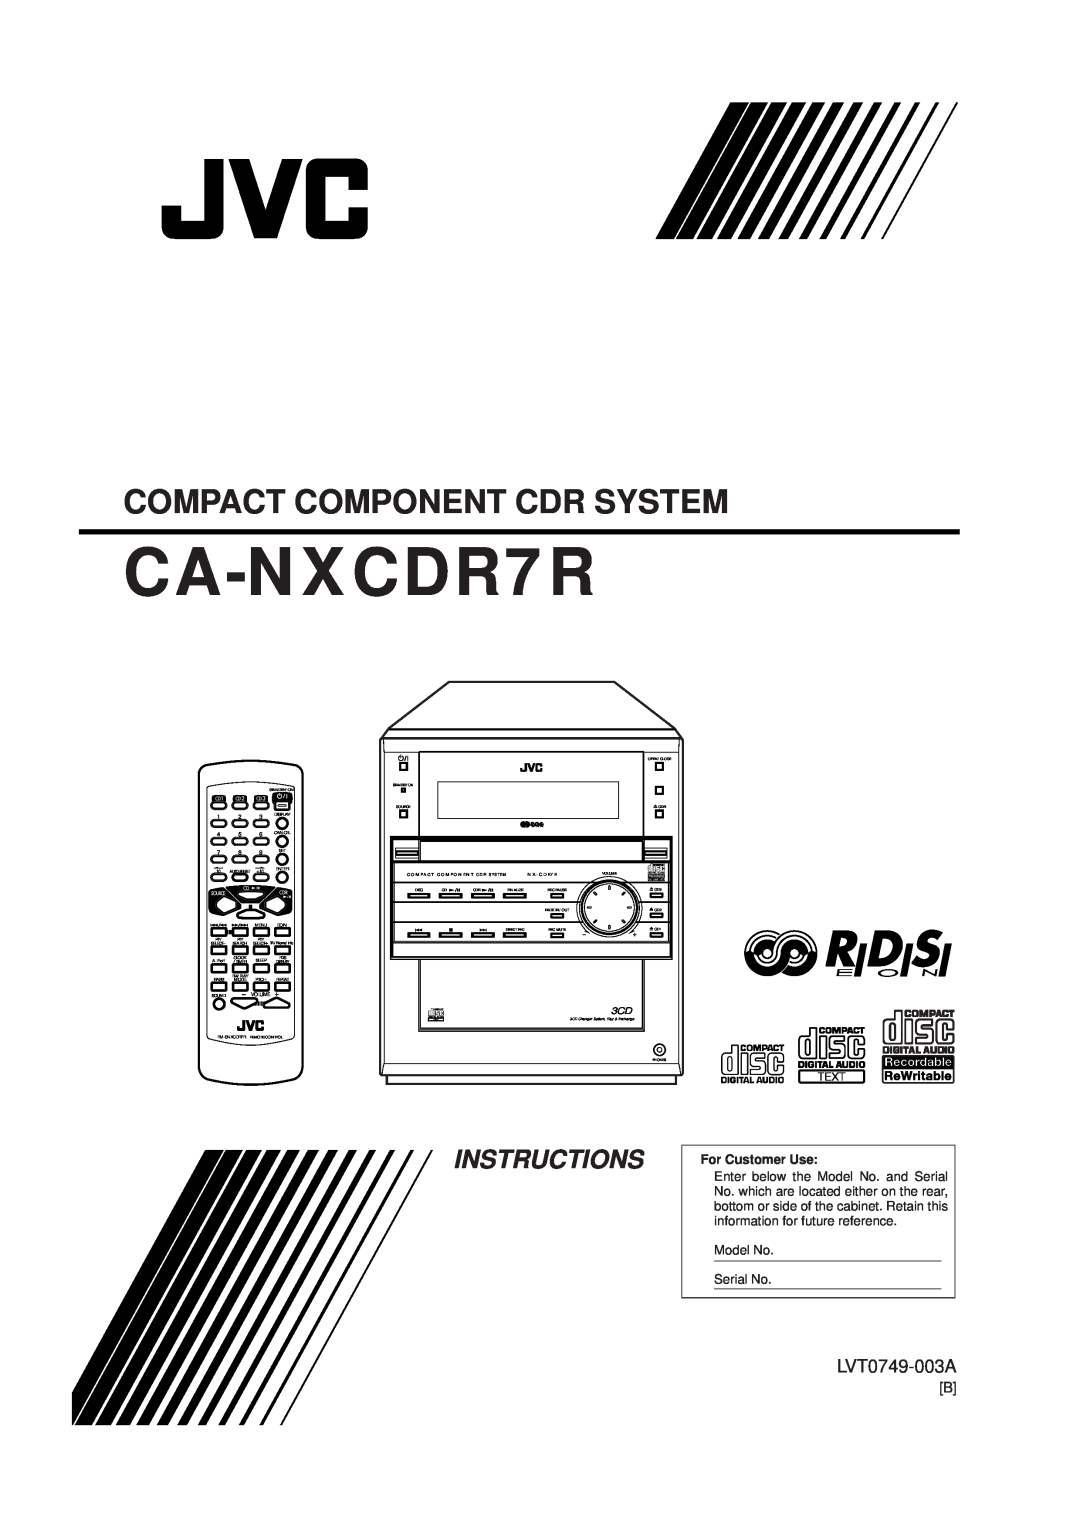 JVC CA-NXCDR7R manual LVT0749-003A, Compact Component Cdr System, Instructions, For Customer Use, 4 5 6 CANCEL 